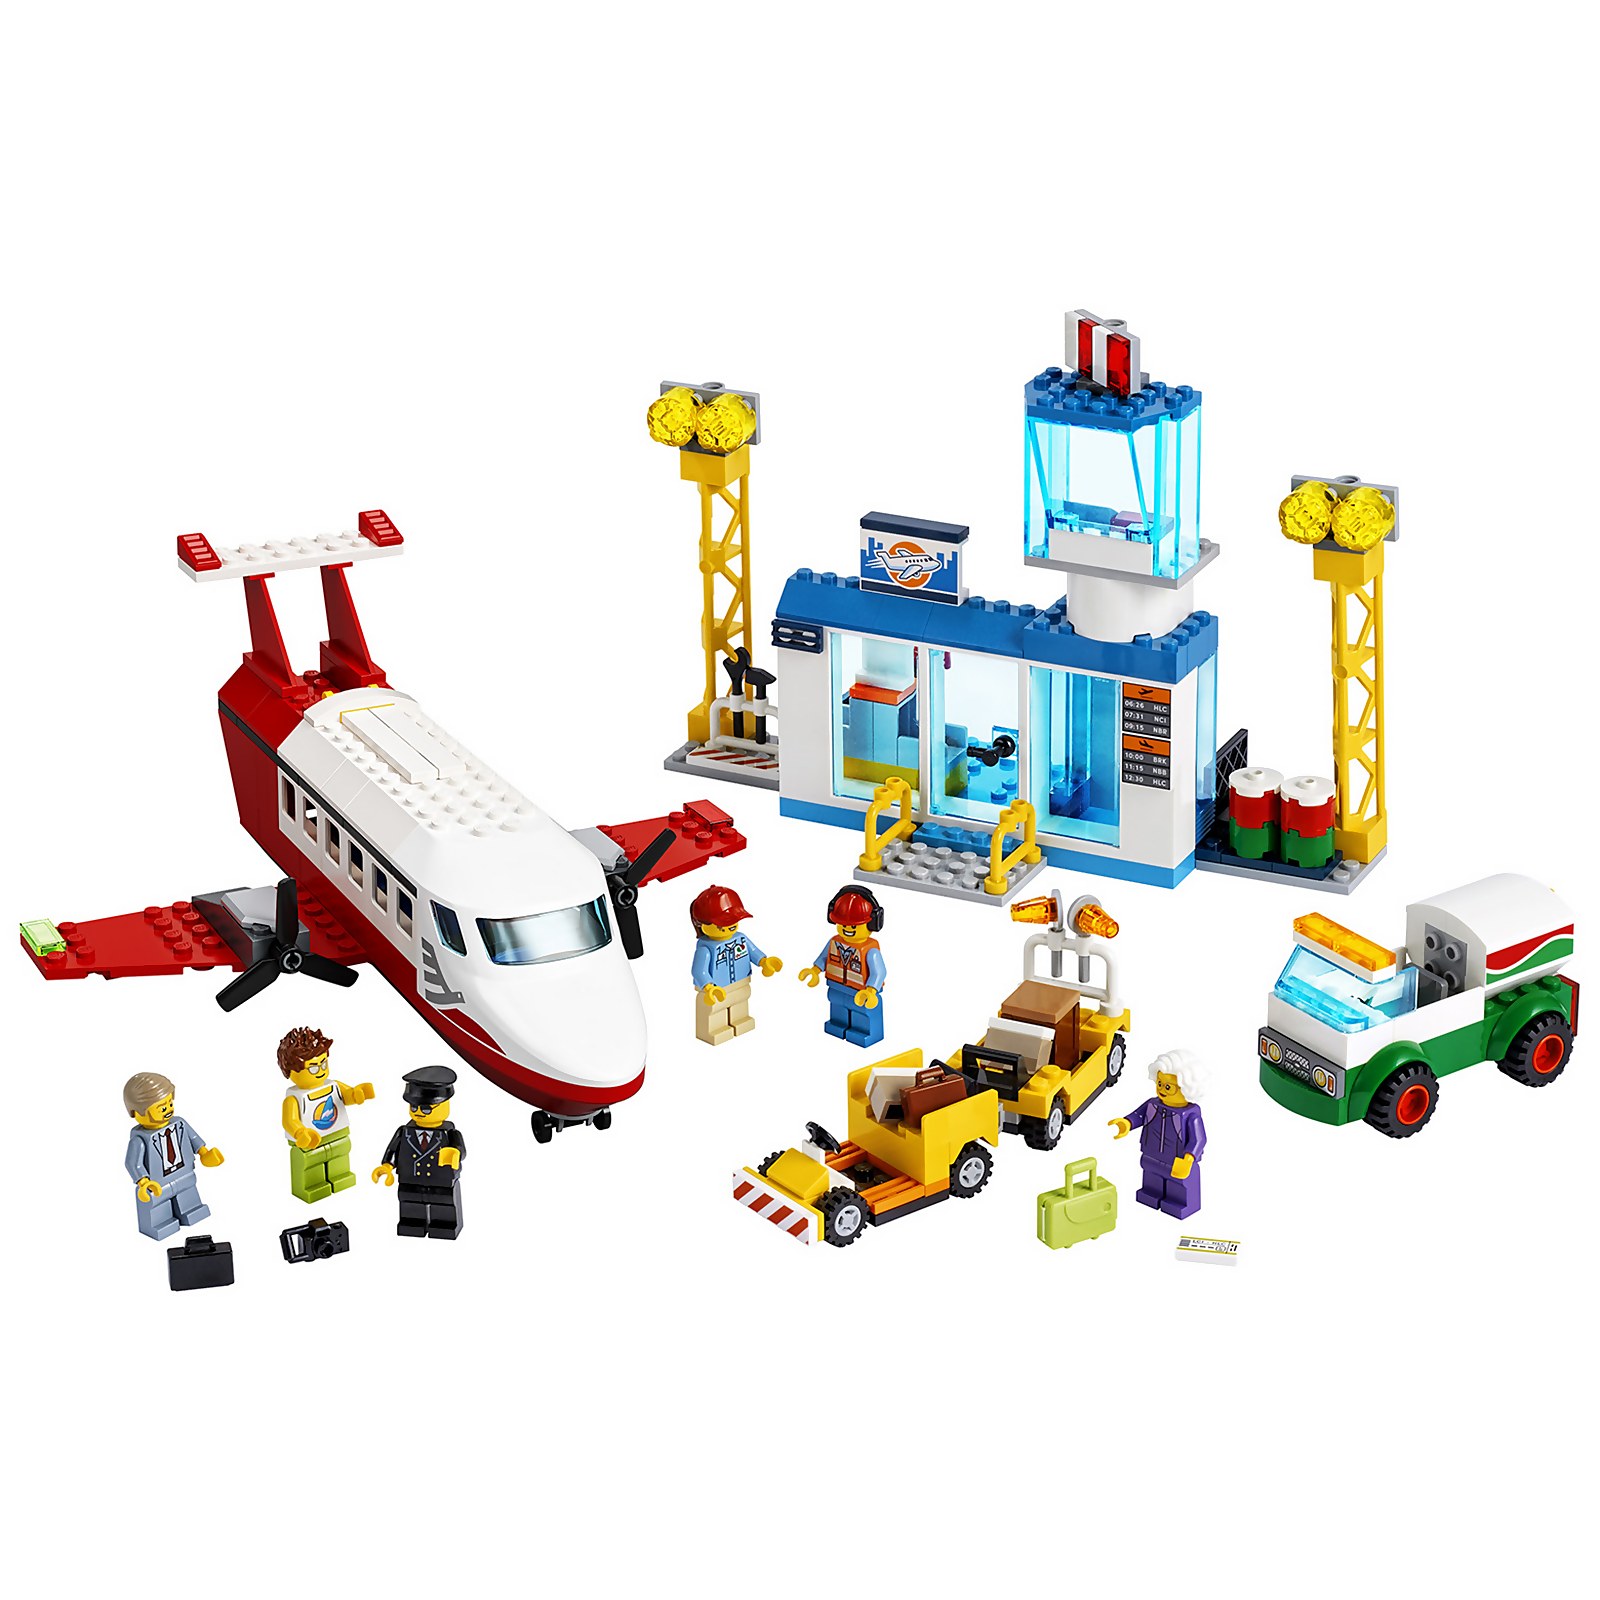 LEGO City Airport: Central Airport (60261)